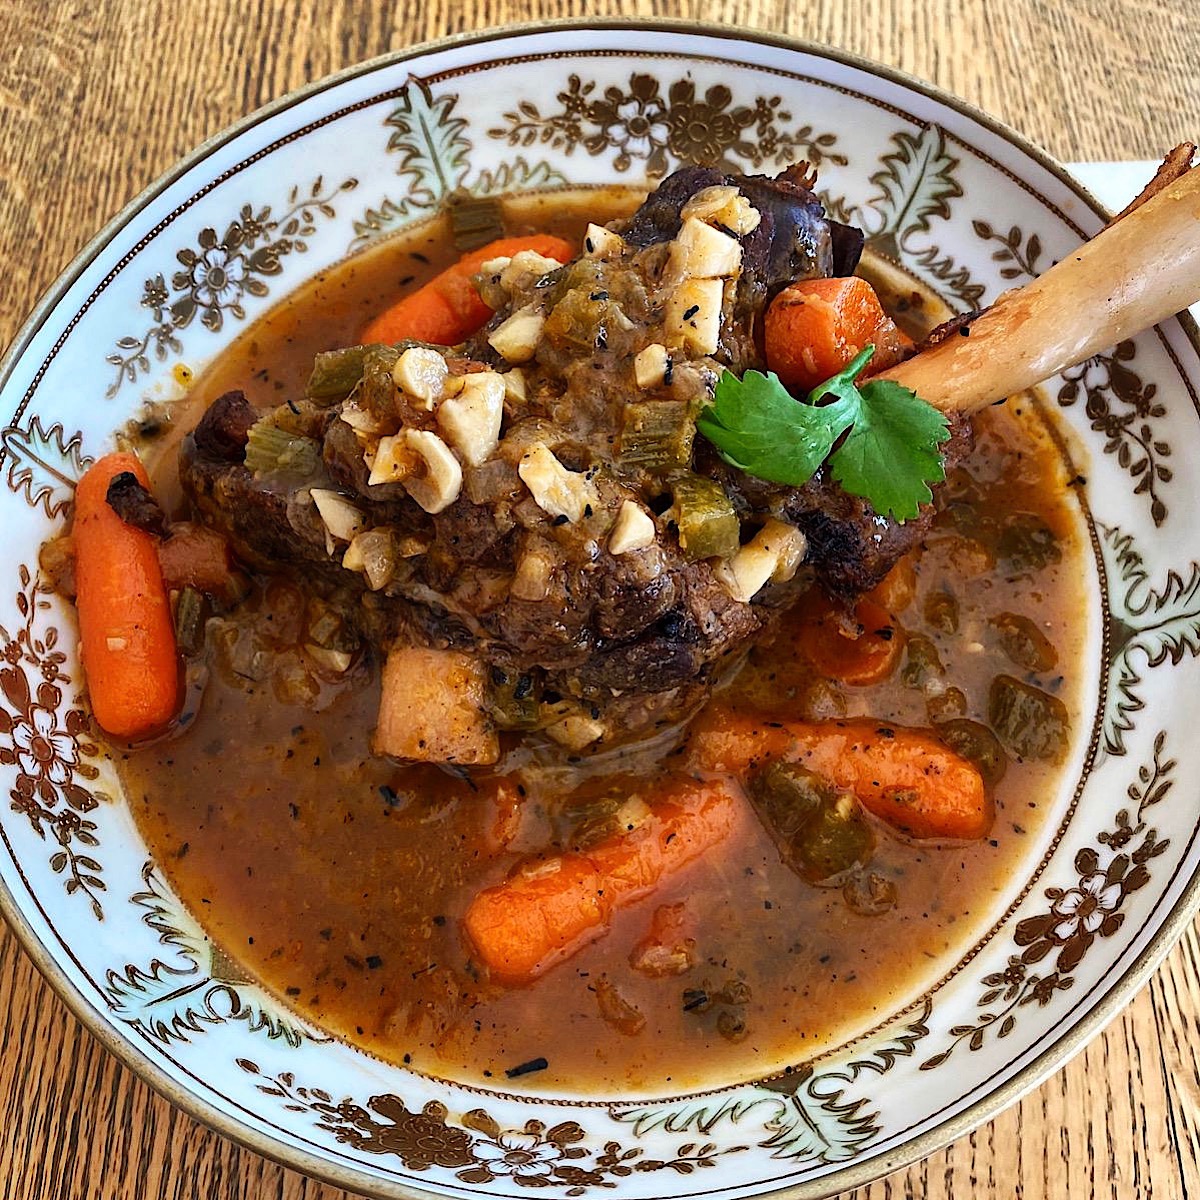 Osso bucco stew in a large bowl with carrots and mushrooms.